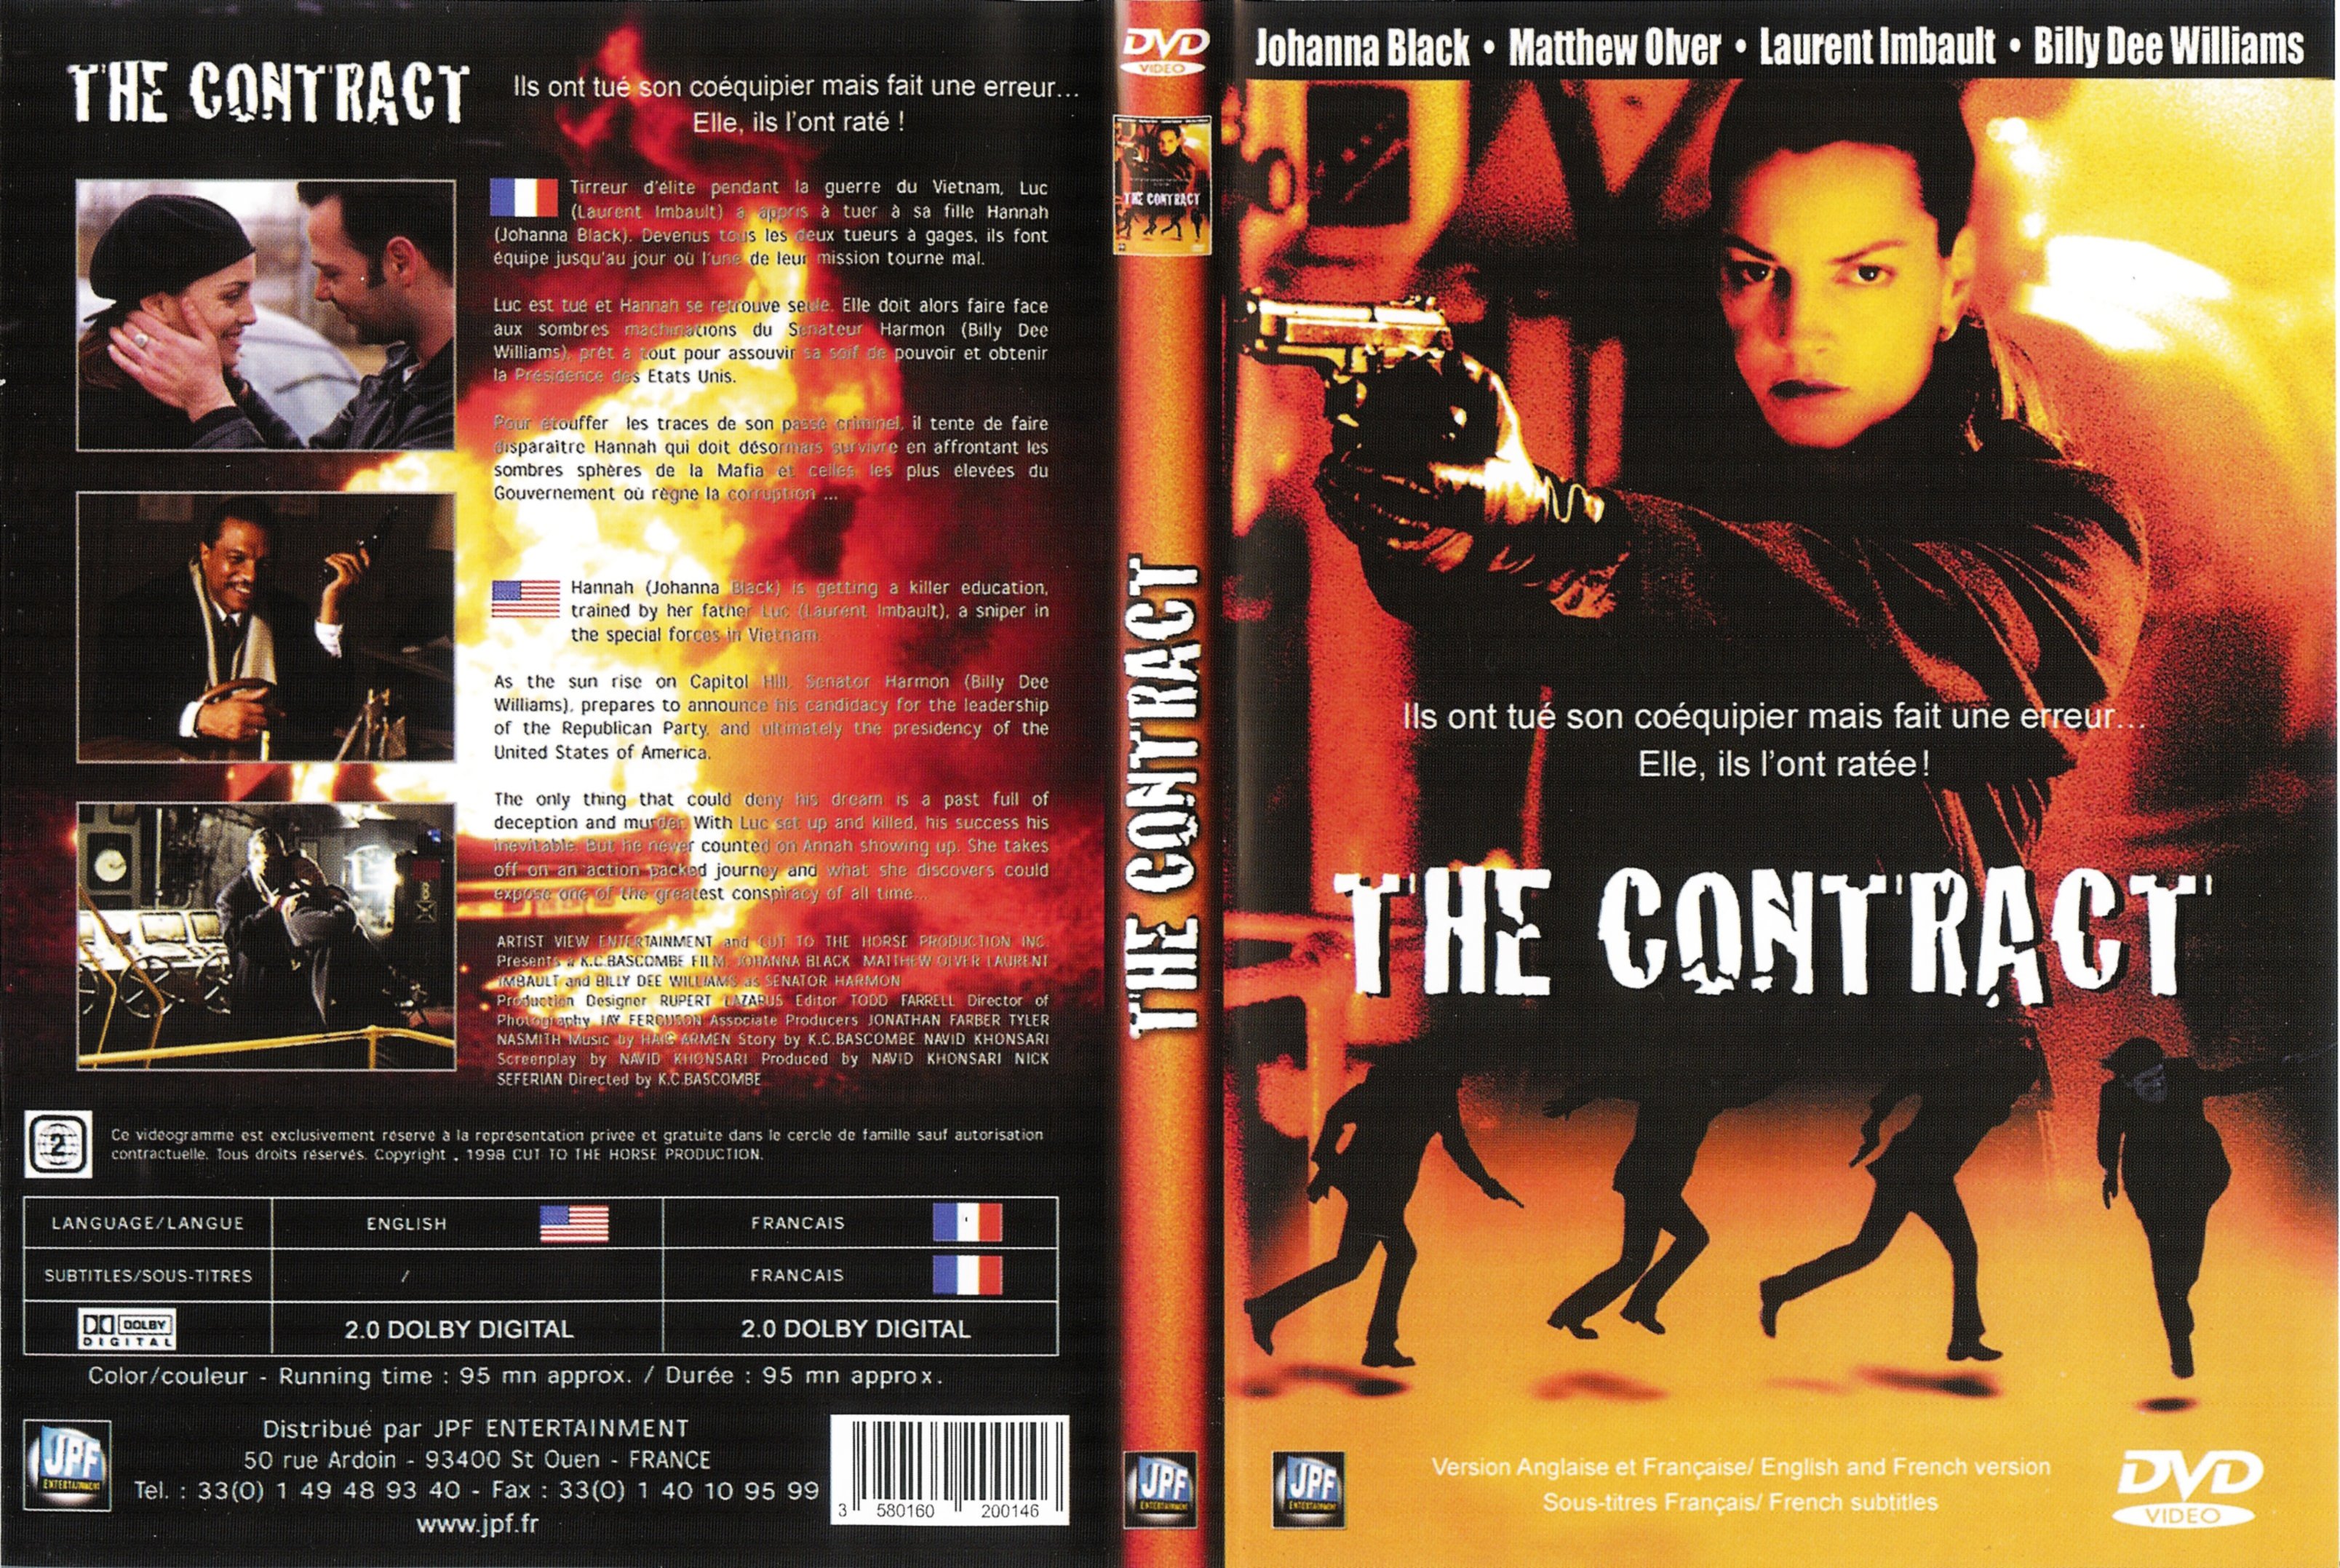 Jaquette DVD The contract (1998)